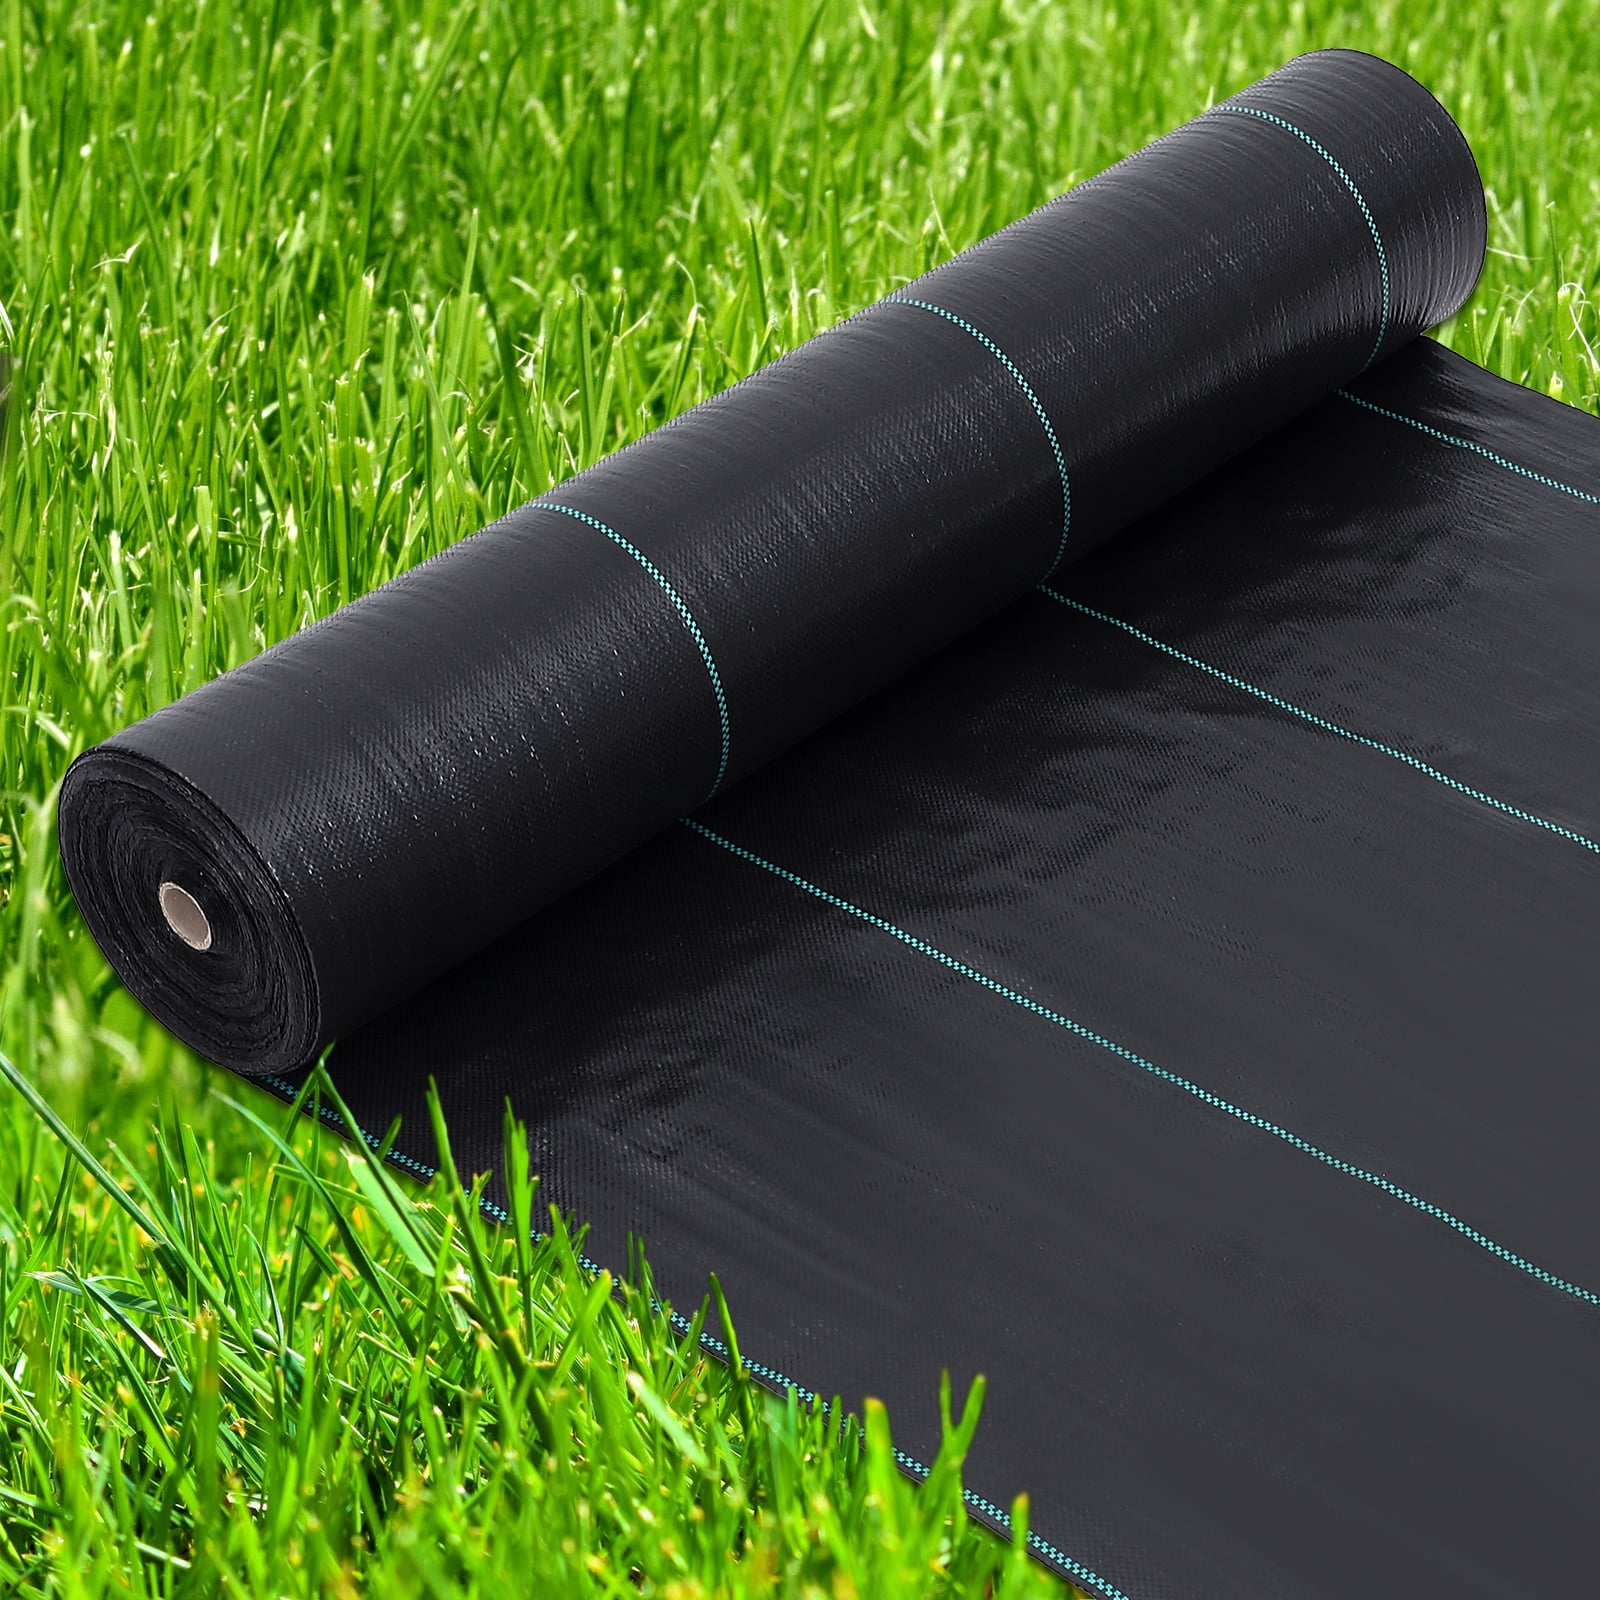 6.5FTX330FT Weed Barrier Landscape Fabric Heavy Duty, Premium 3.2